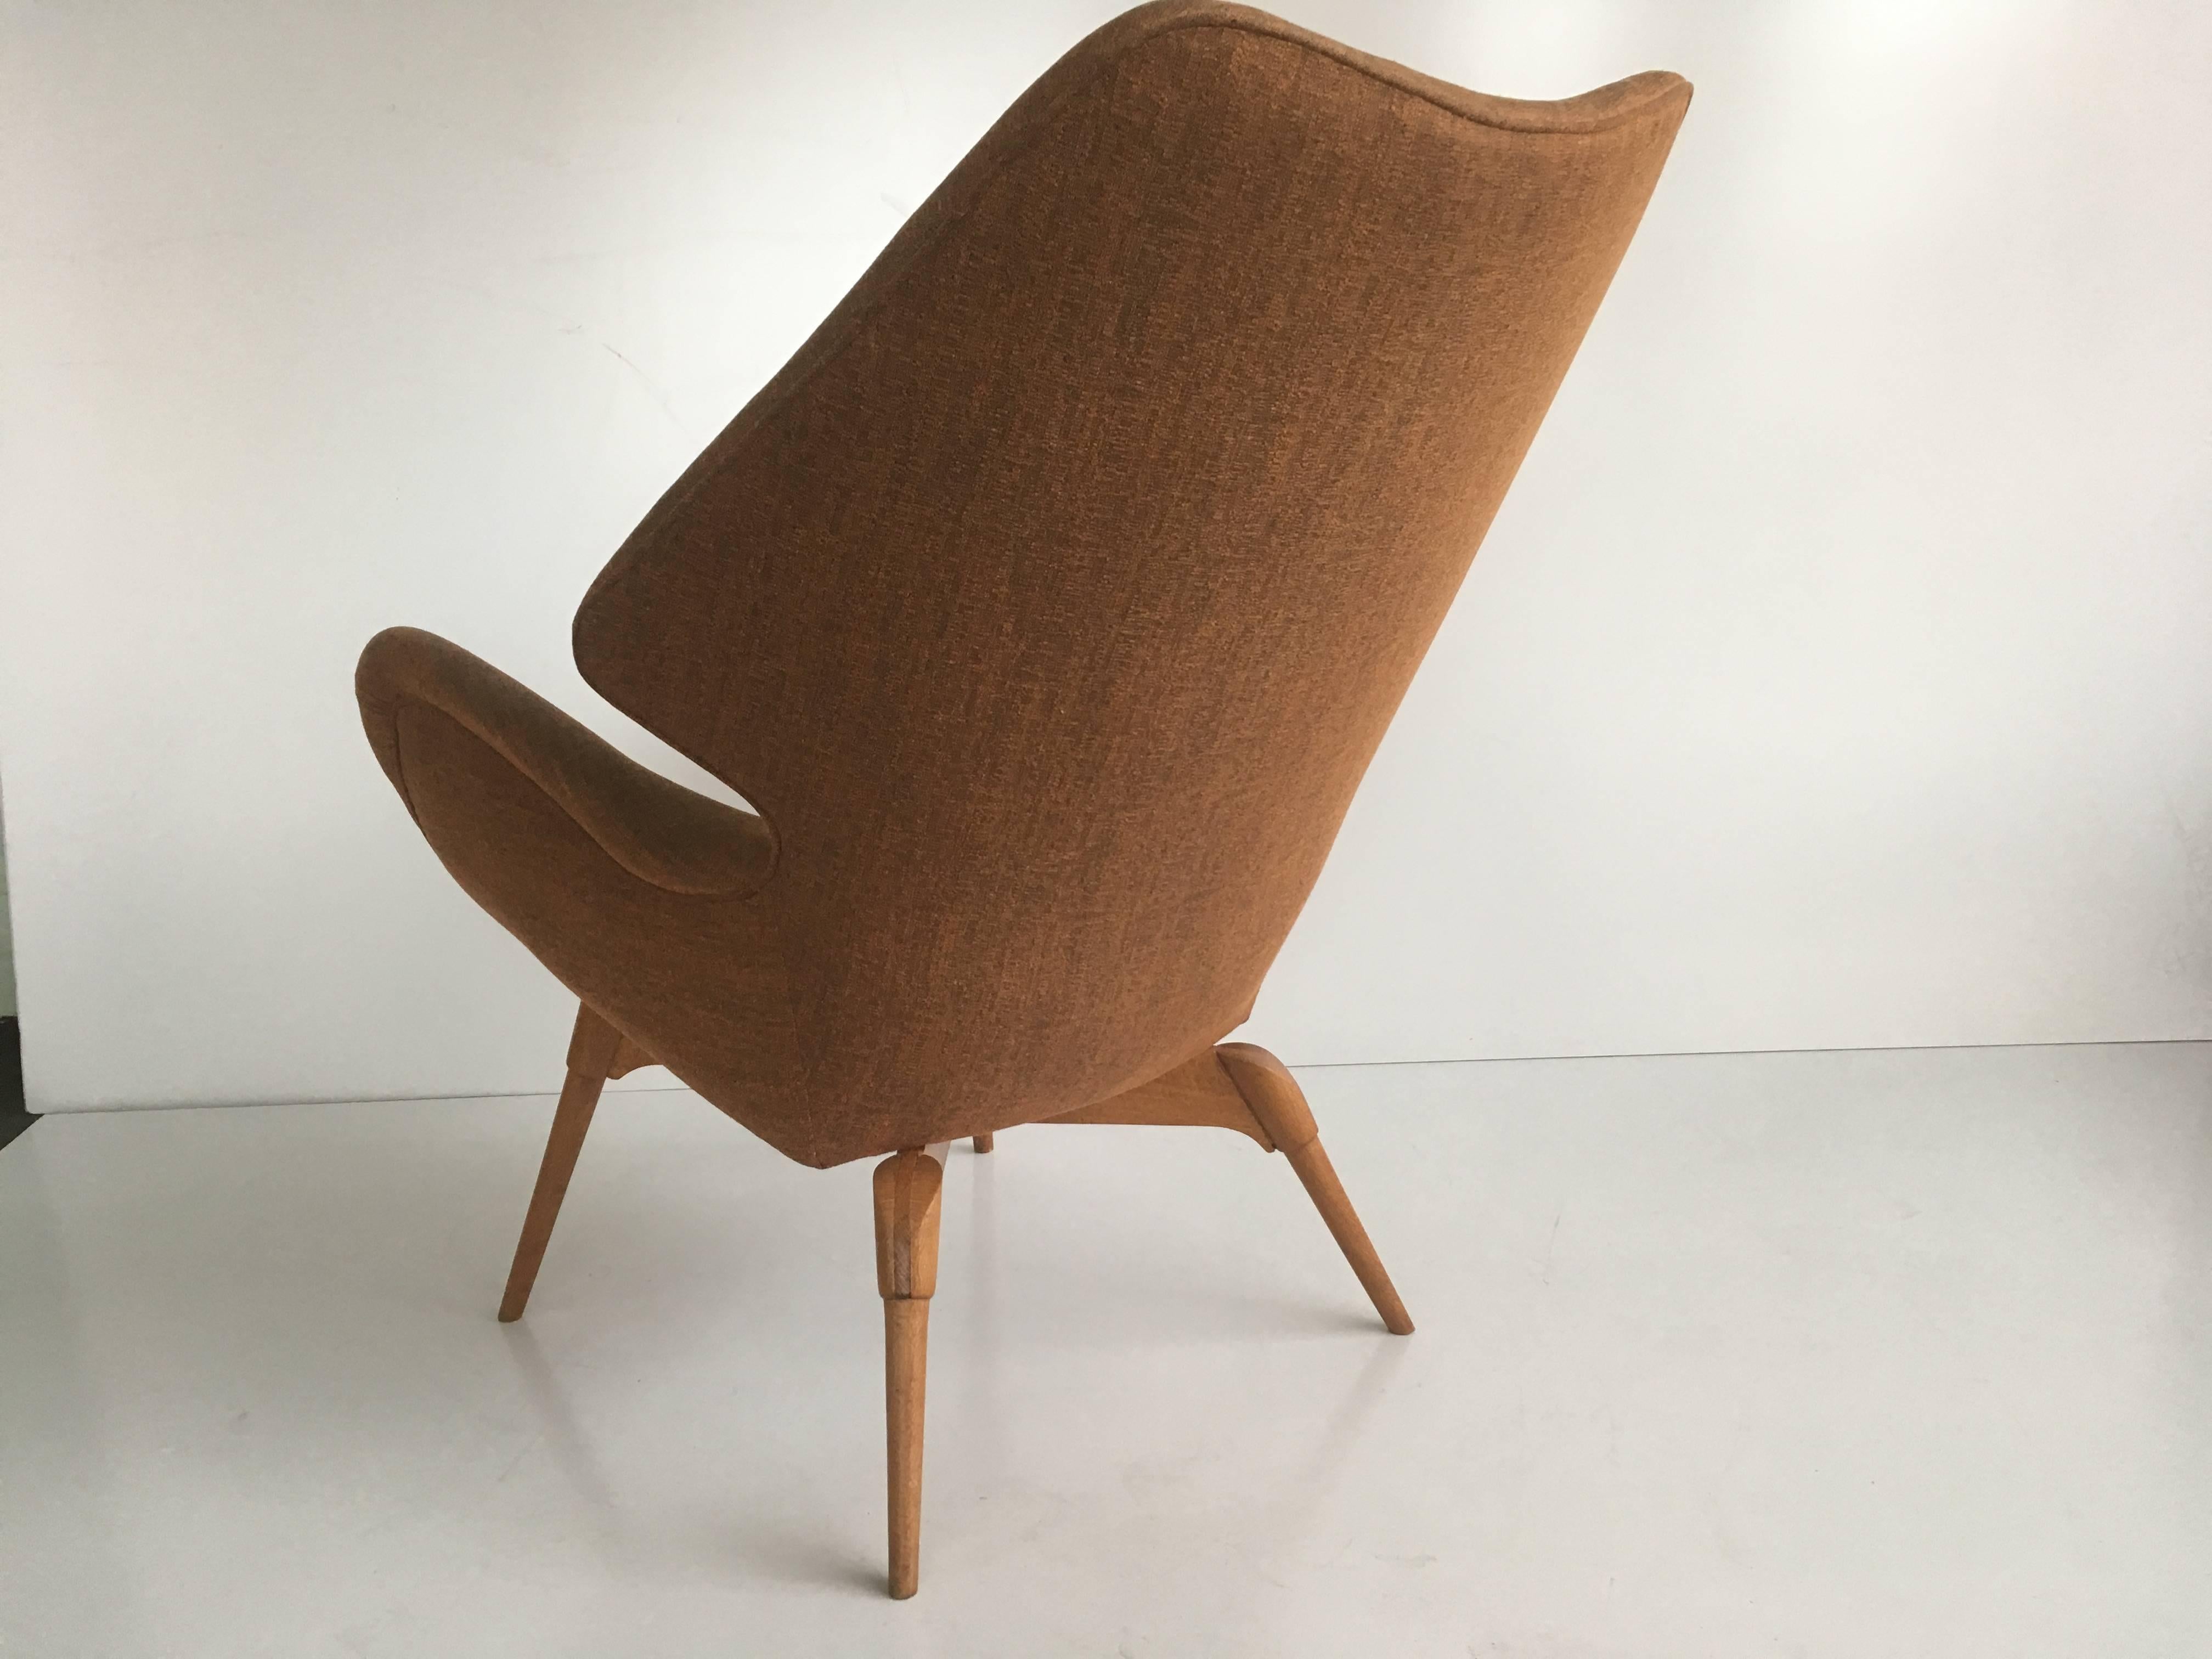 Iconic B230 Contour chair by highly regarded Australian Mid-Century designer Grant Featherston.

His 'Contour' series was born of Featherston's dream of making a chair that would be a ‘negative’ of the human body to create the concept of ‘contour